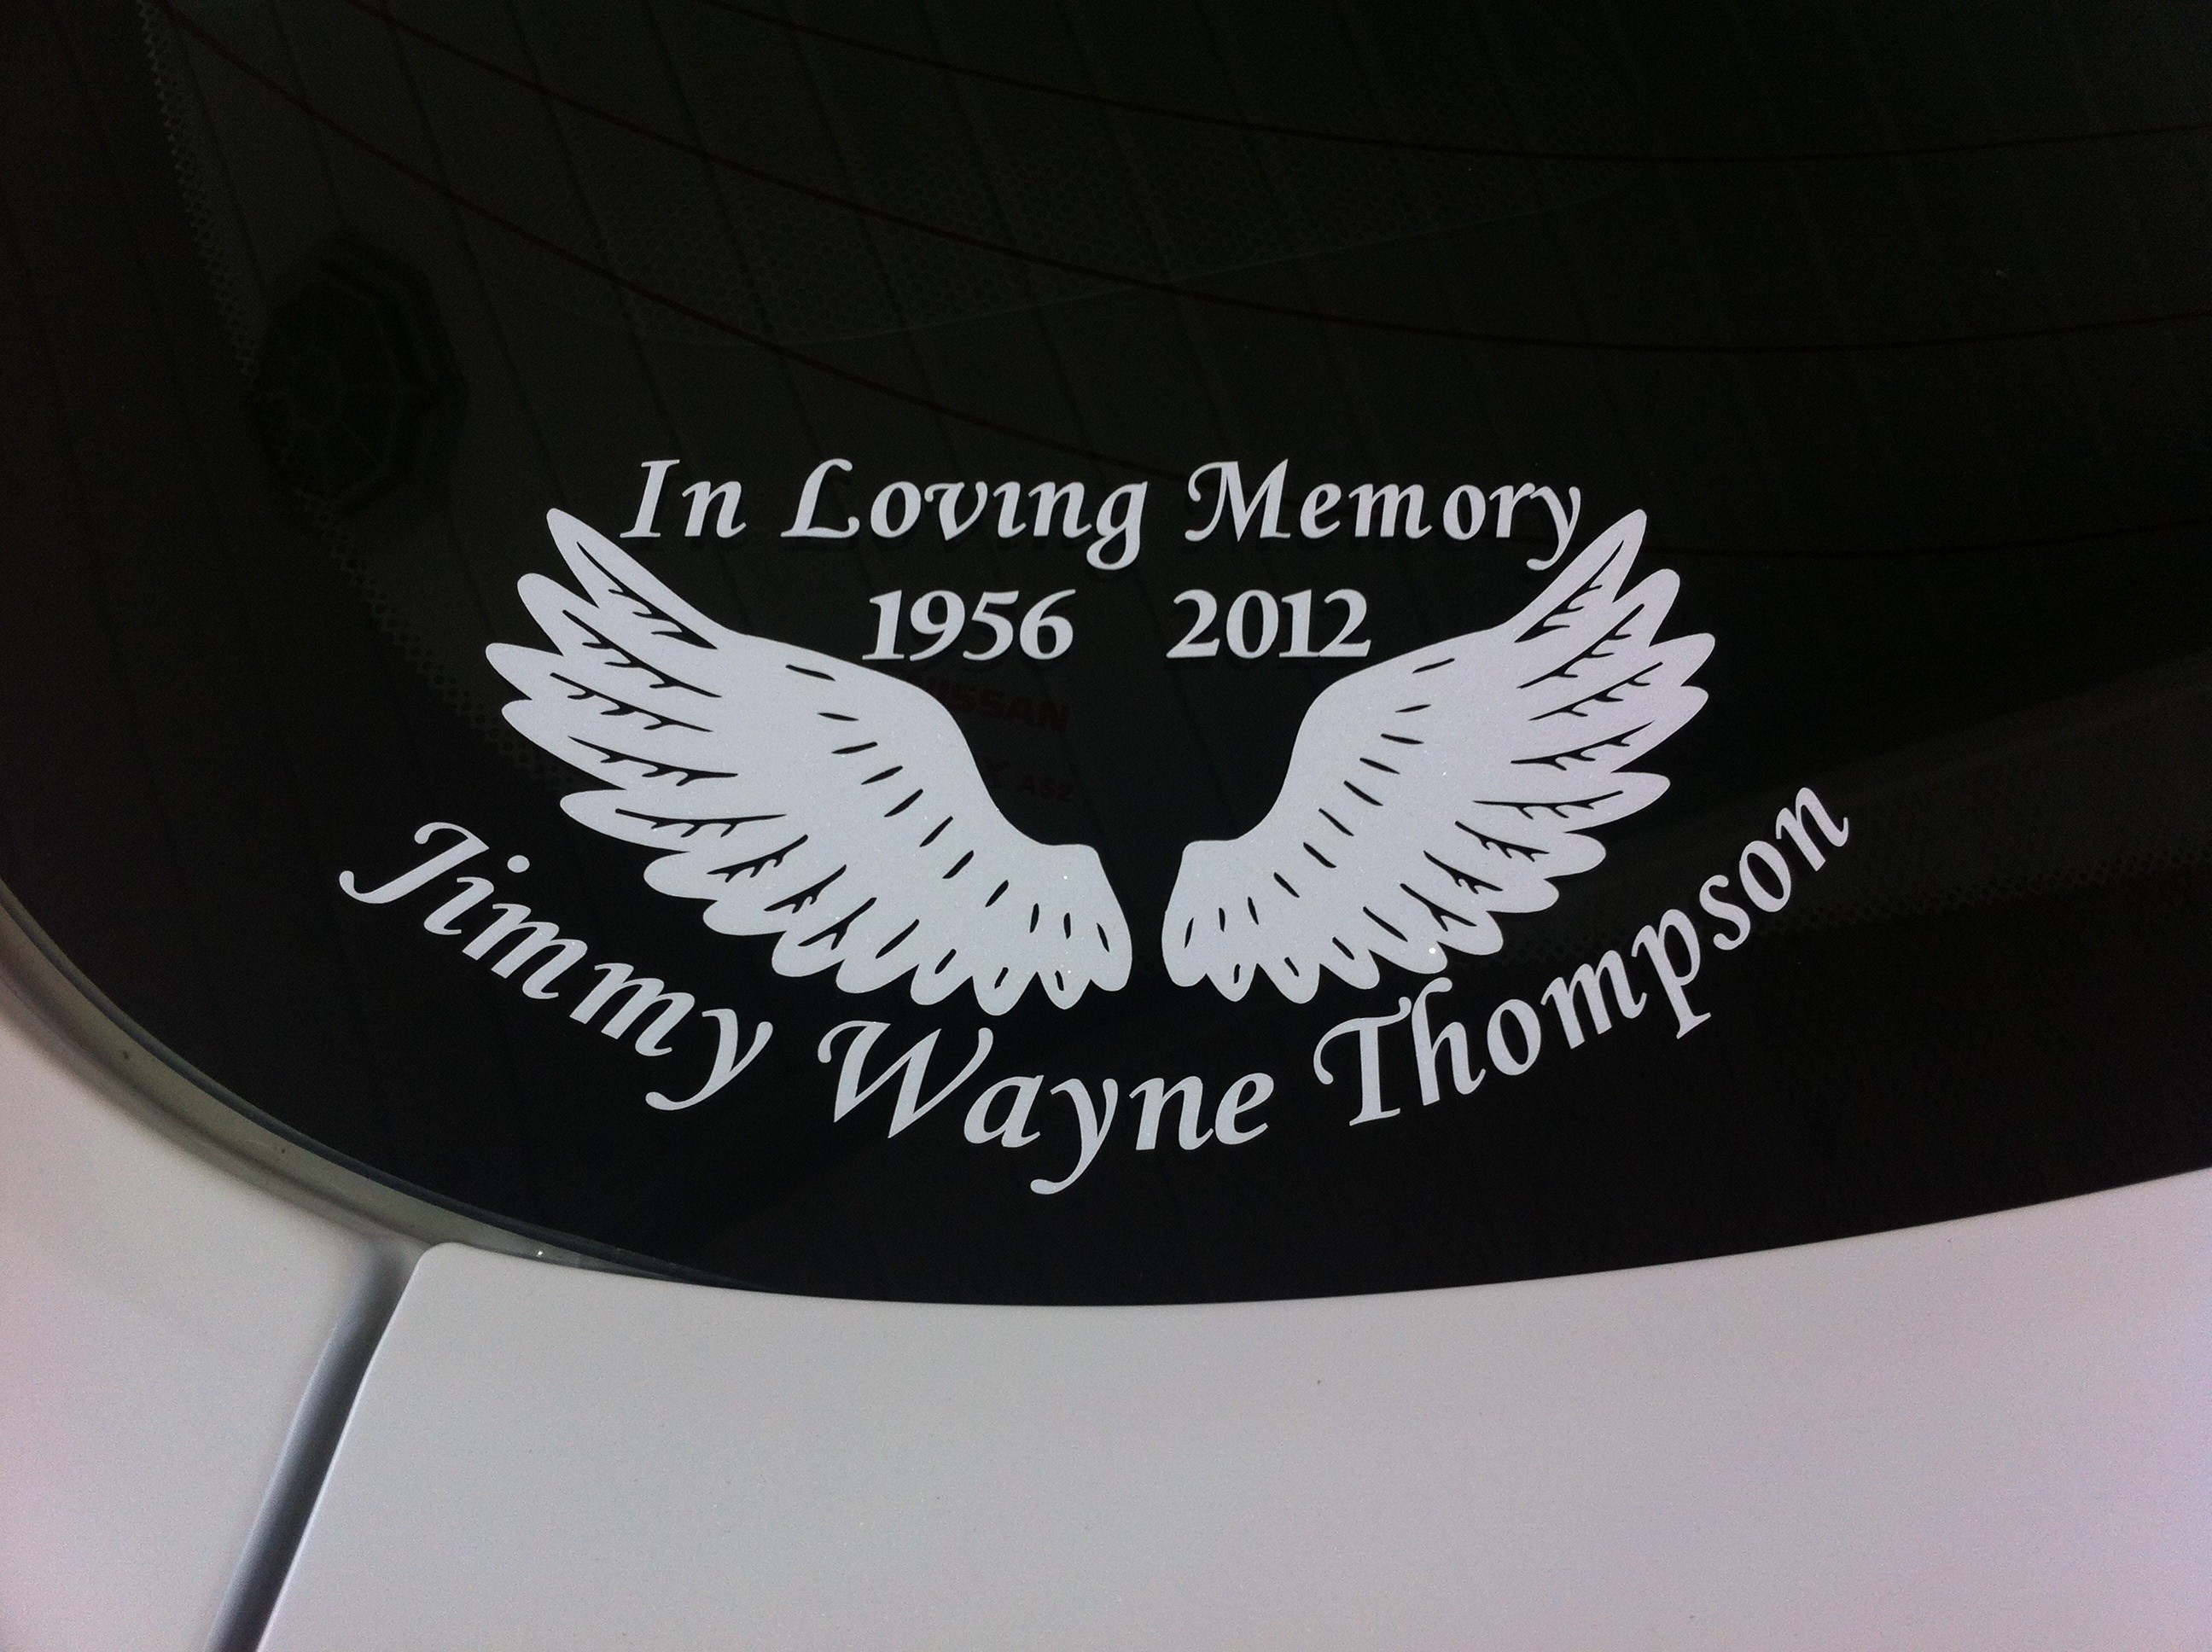 2592x1936 Luxury In Loving Memory Logos 69 About Remodel Online Logo Design With In  Loving Memory Logos